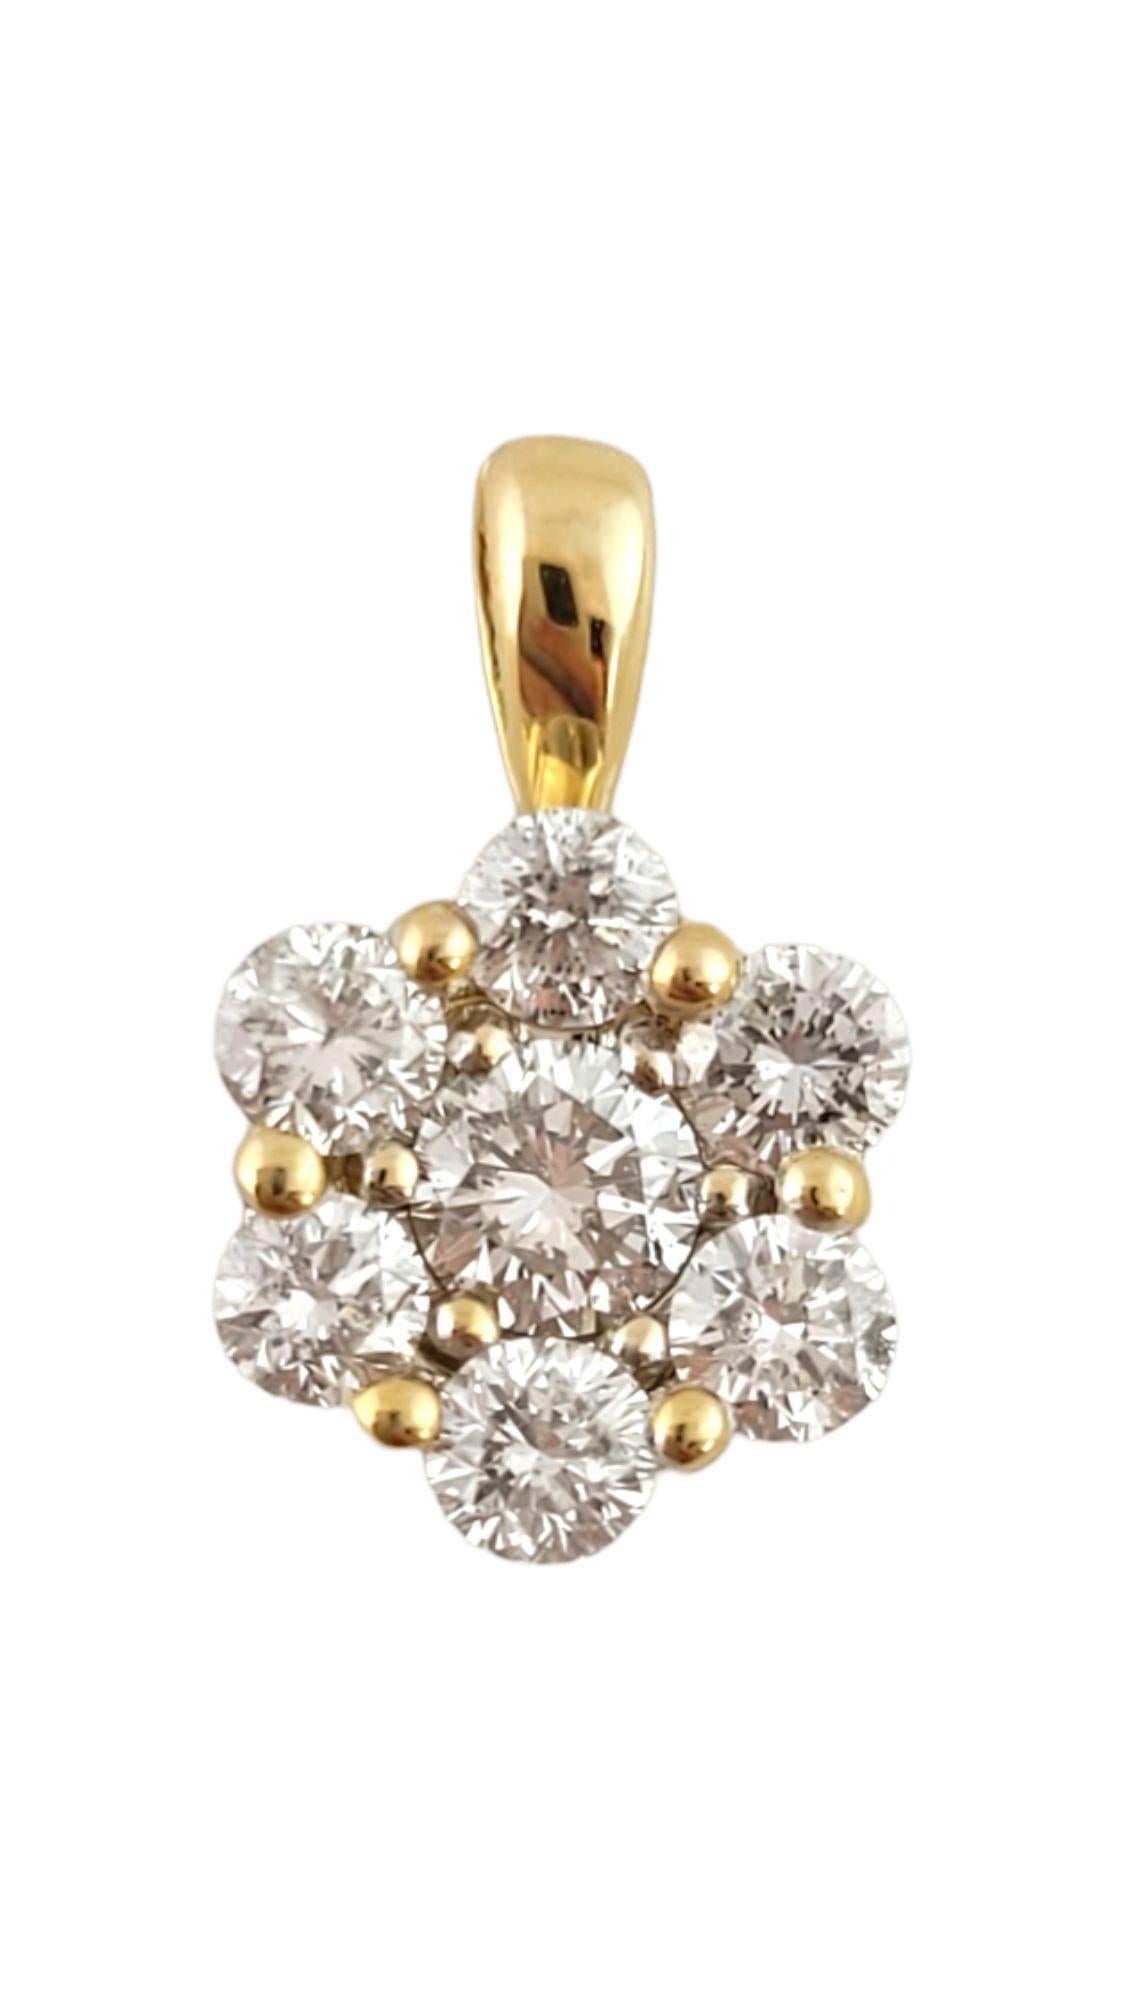 Vintage 14 Karat Yellow Gold and Diamond Floral Pendant

This lovely floral pendant features seven round brilliant cut diamonds set in classic 14K yellow gold.

Approximate total diamond weight: .50 ct. (center: .15 ct.)

Diamond color: H

Diamond